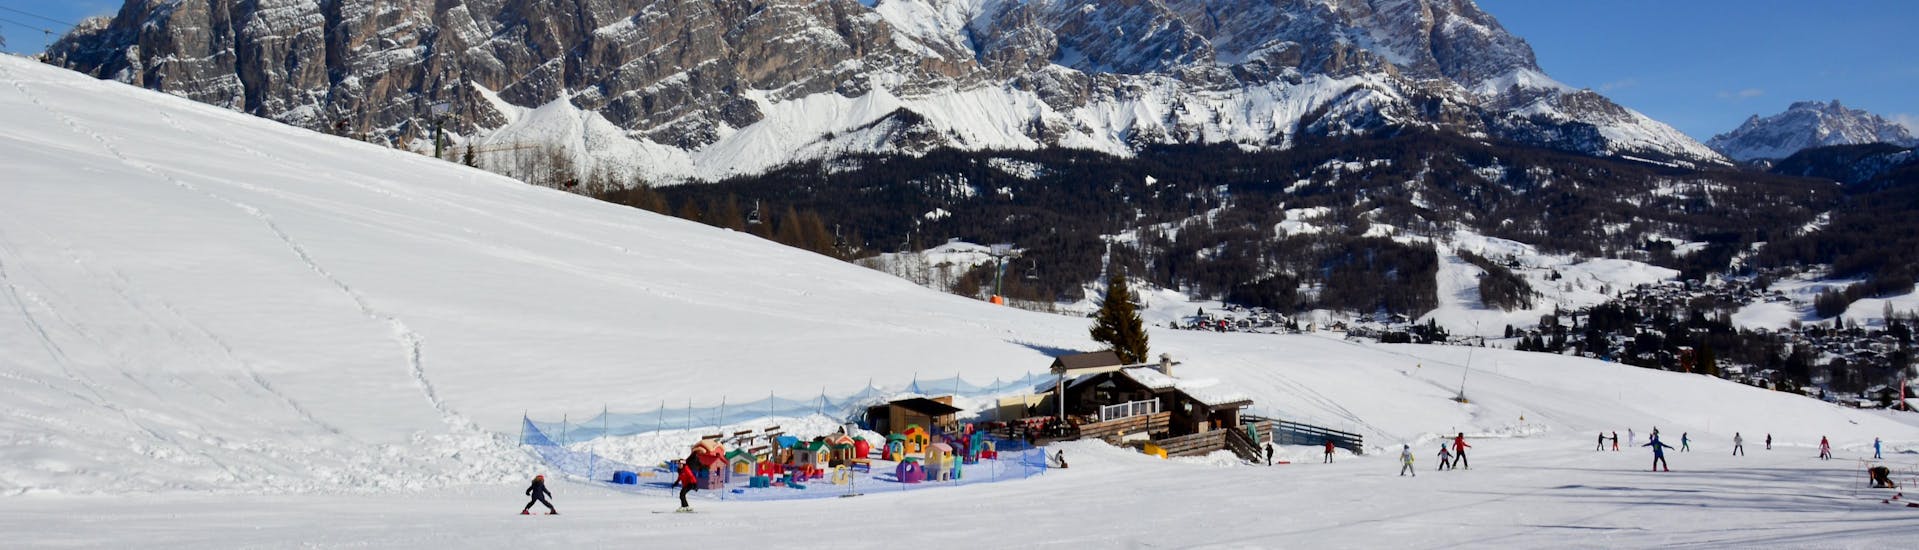 A view of a snowy mountain top in the ski resort of Pecol, where ski schools gather to start their ski lessons.